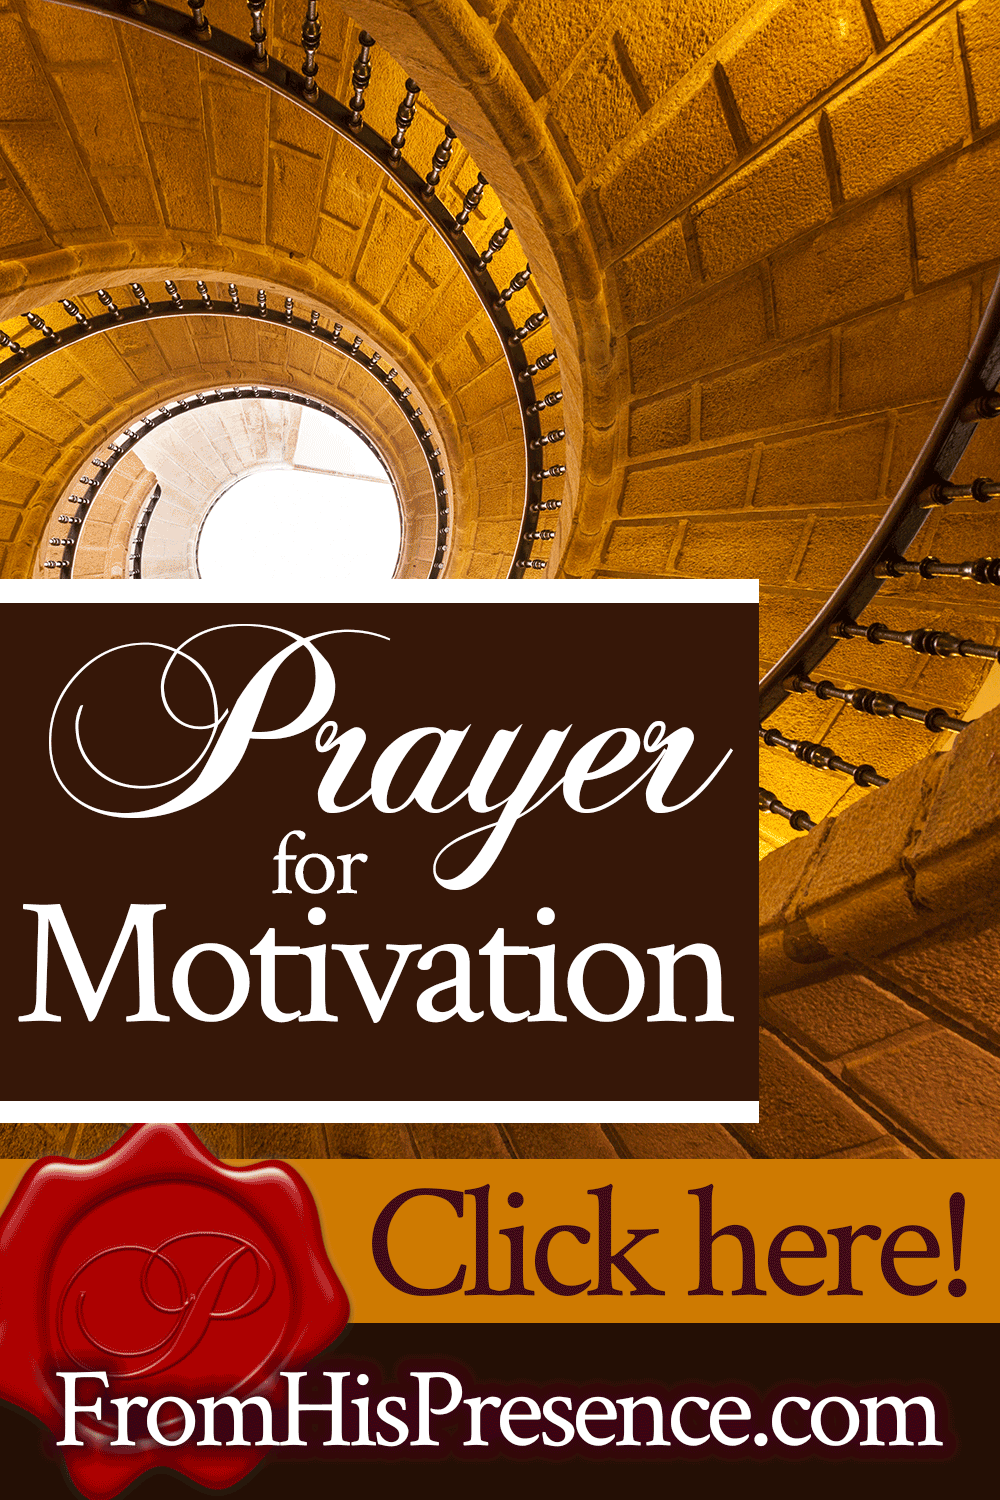 Prayer for Motivation | by Jamie Rohrbaugh | FromHisPresence.com